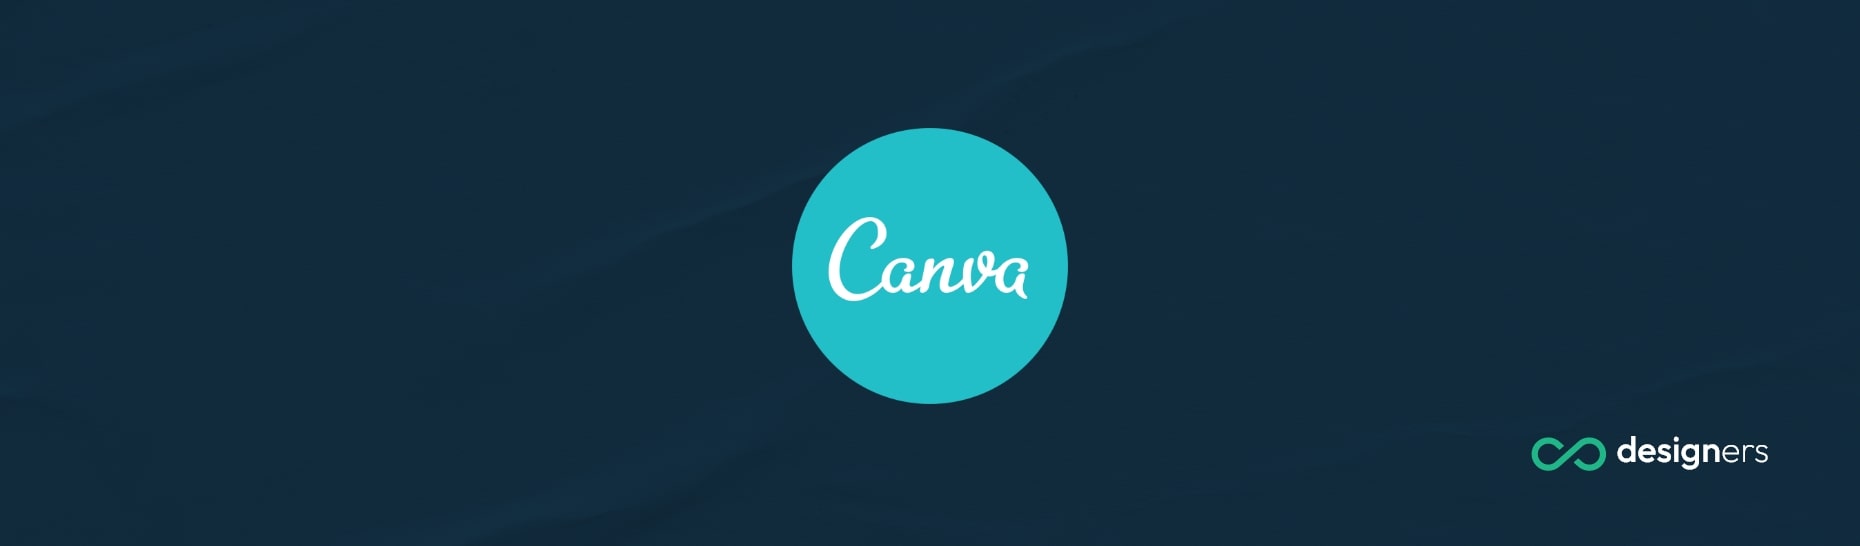 Is There a Cartoon Effect on Canva?